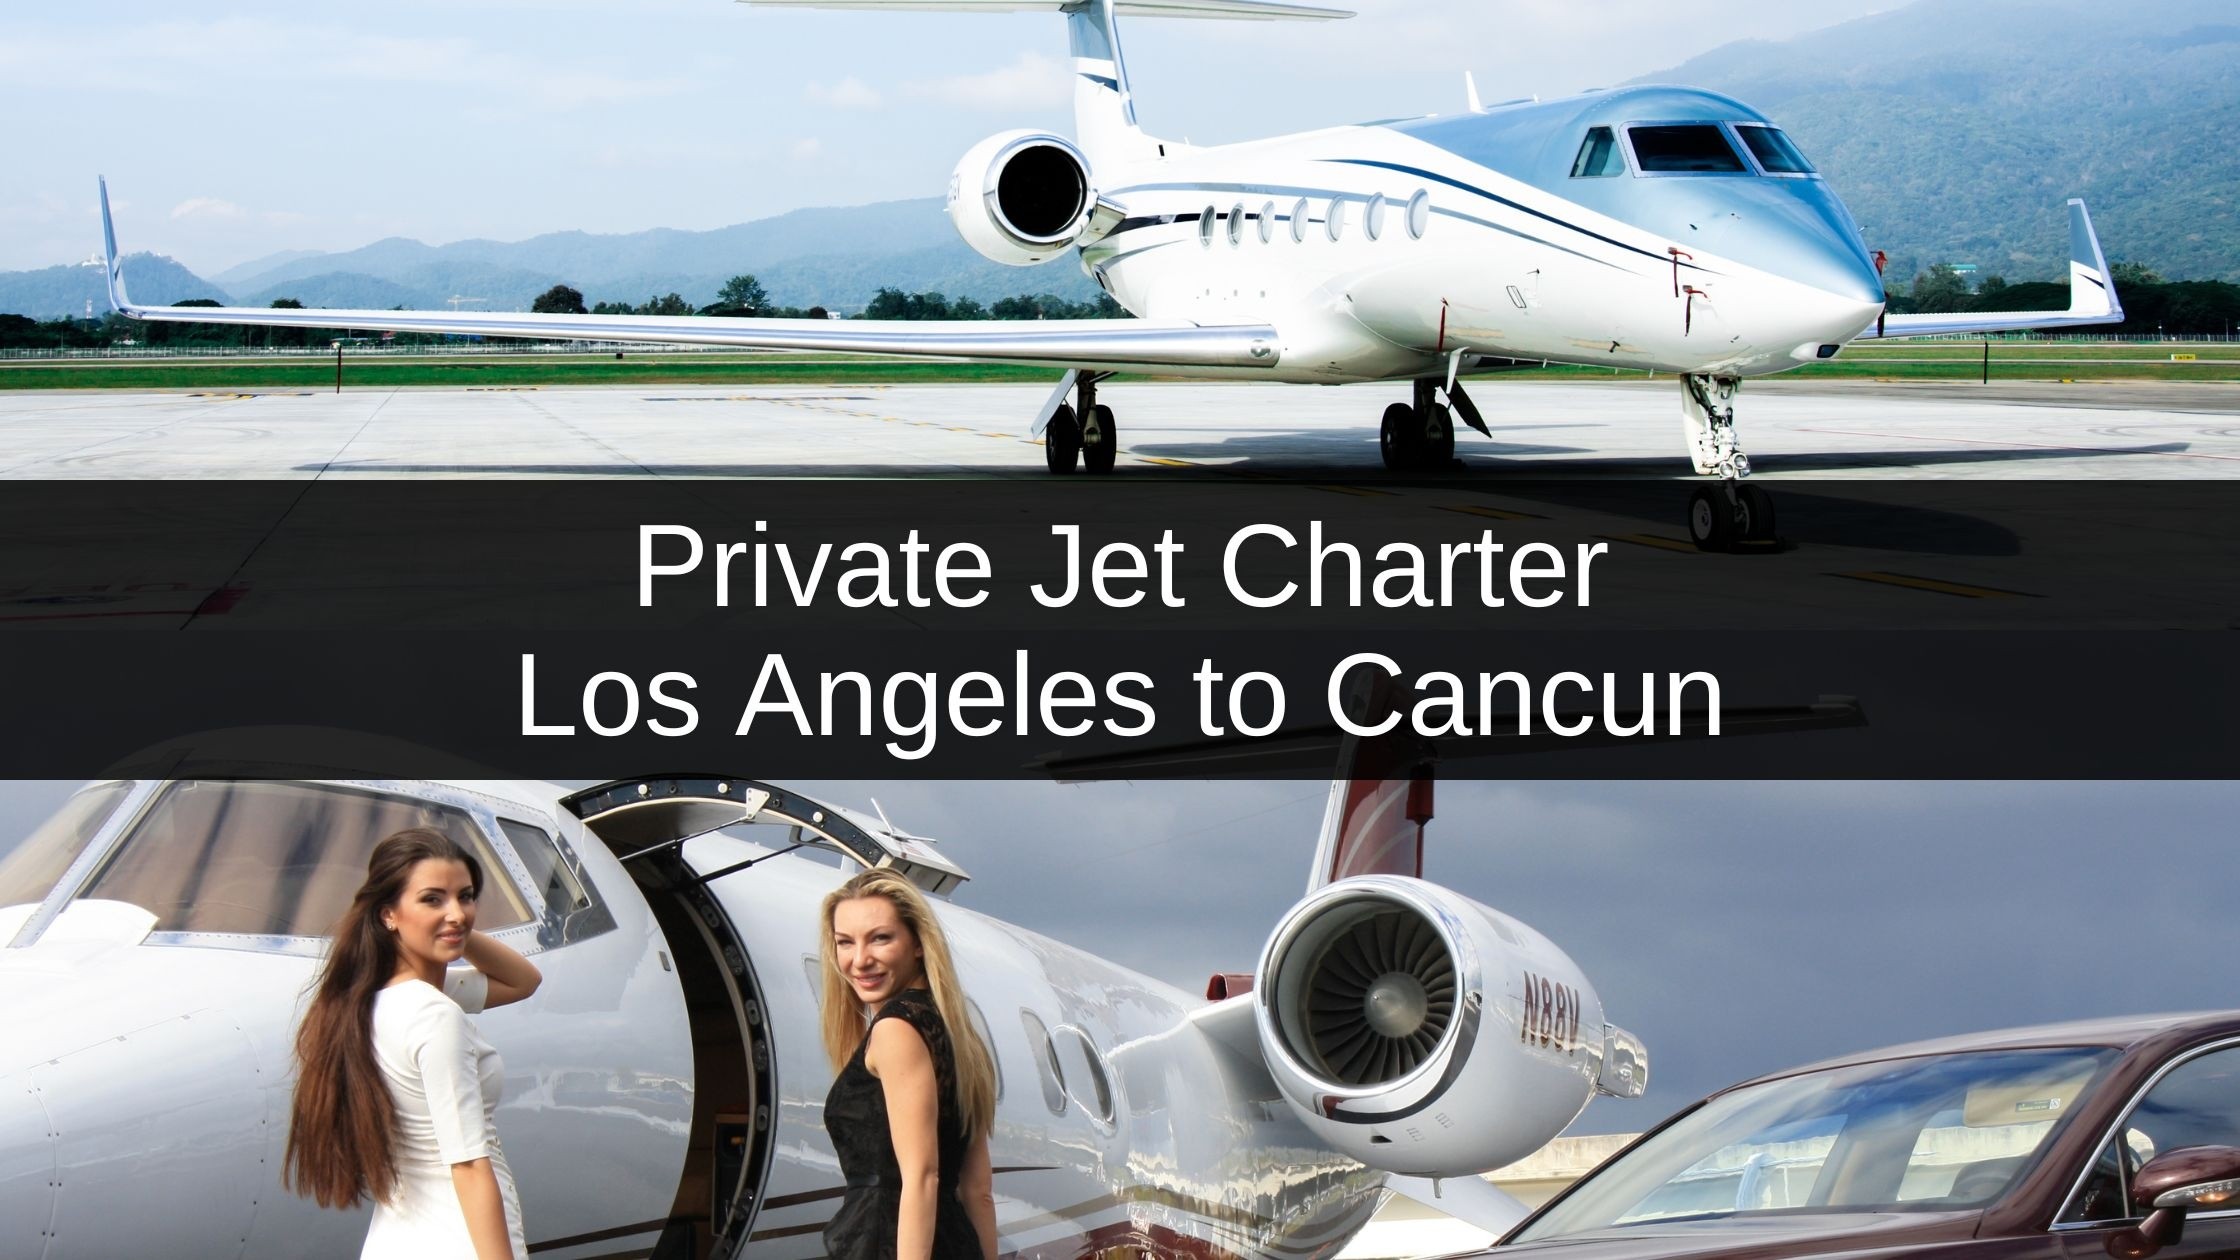 Priate Jet from Los Angeles to Cancun